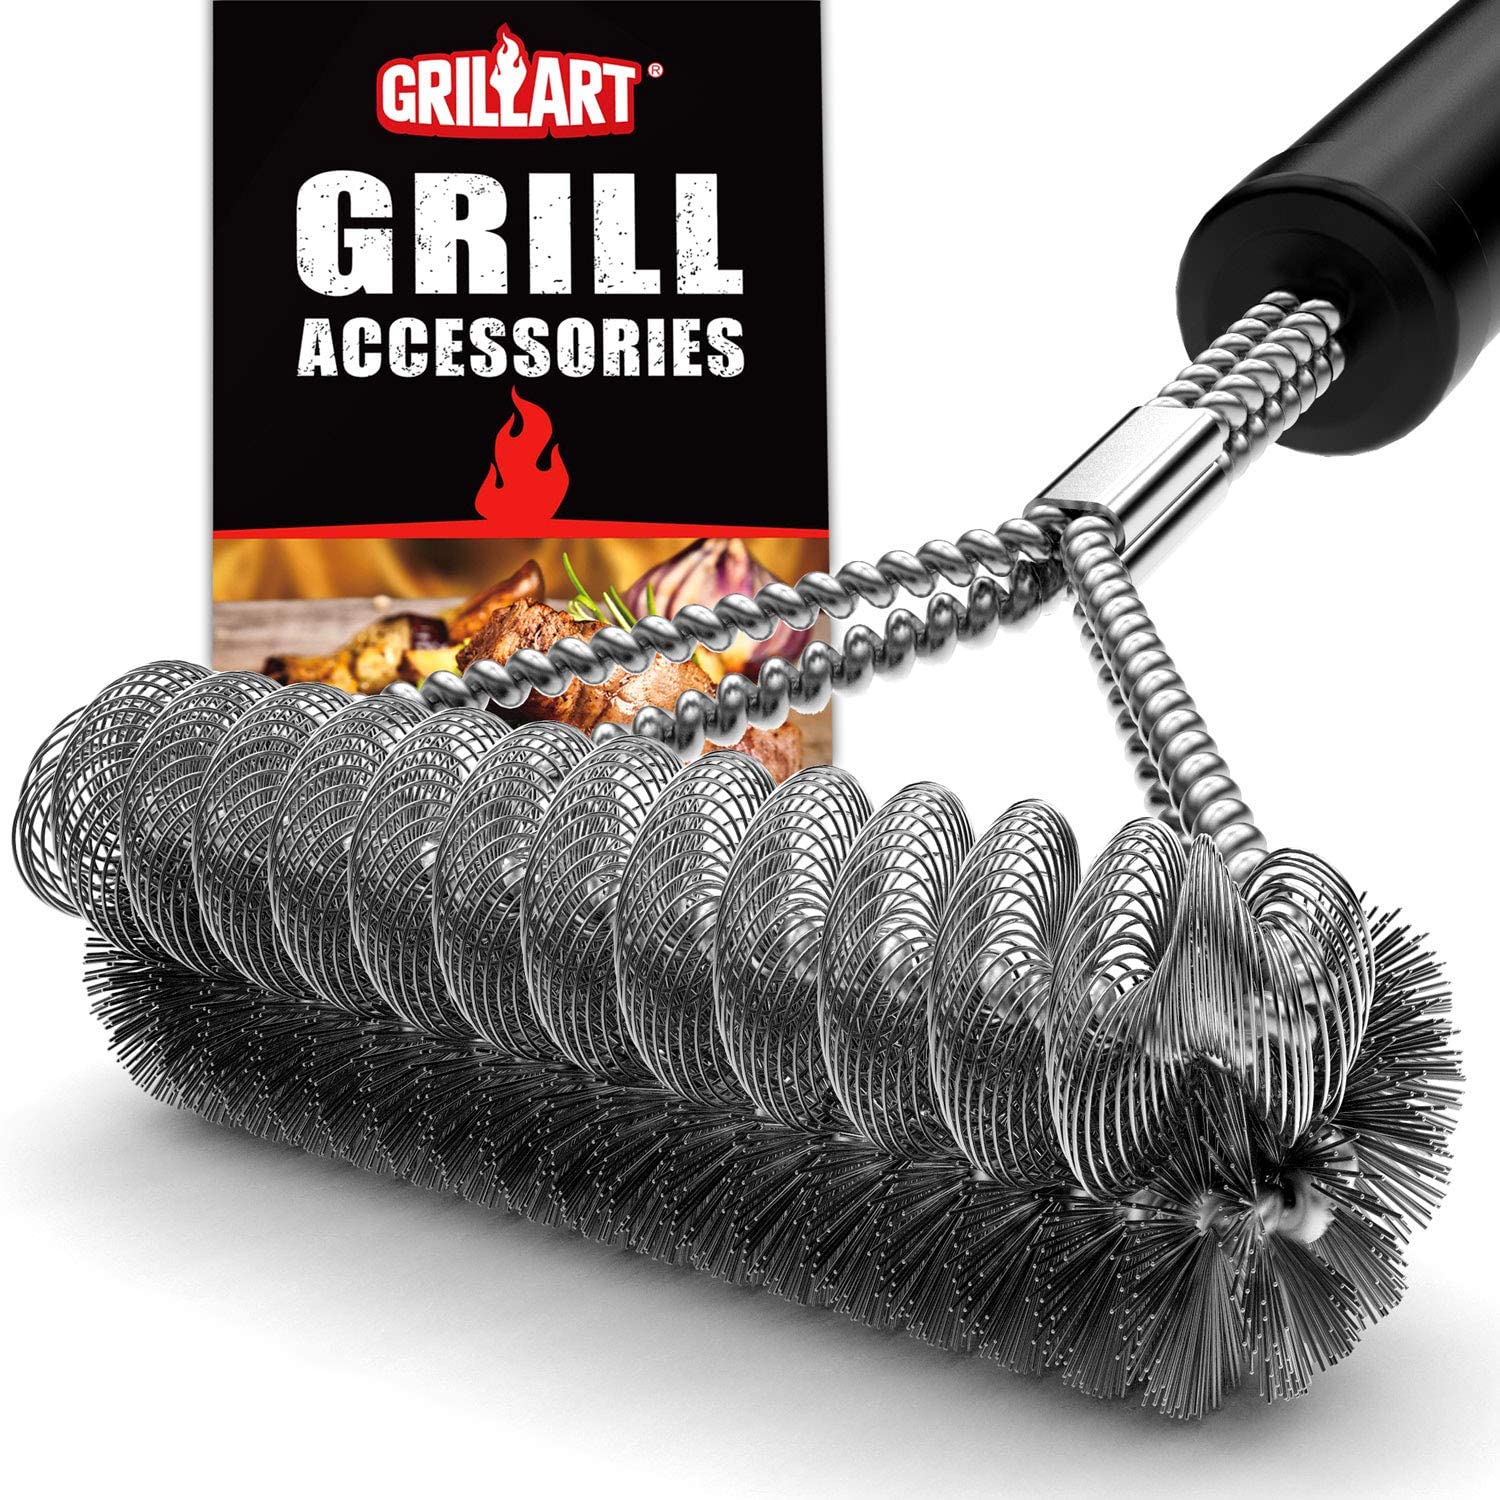 Drillbrush Grill Brushes, Cleaning Brush for Drill, Grill Cleaner, BBQ Accessories, Smokers & Grills, Rust Remover, K-S-42-QC-DB